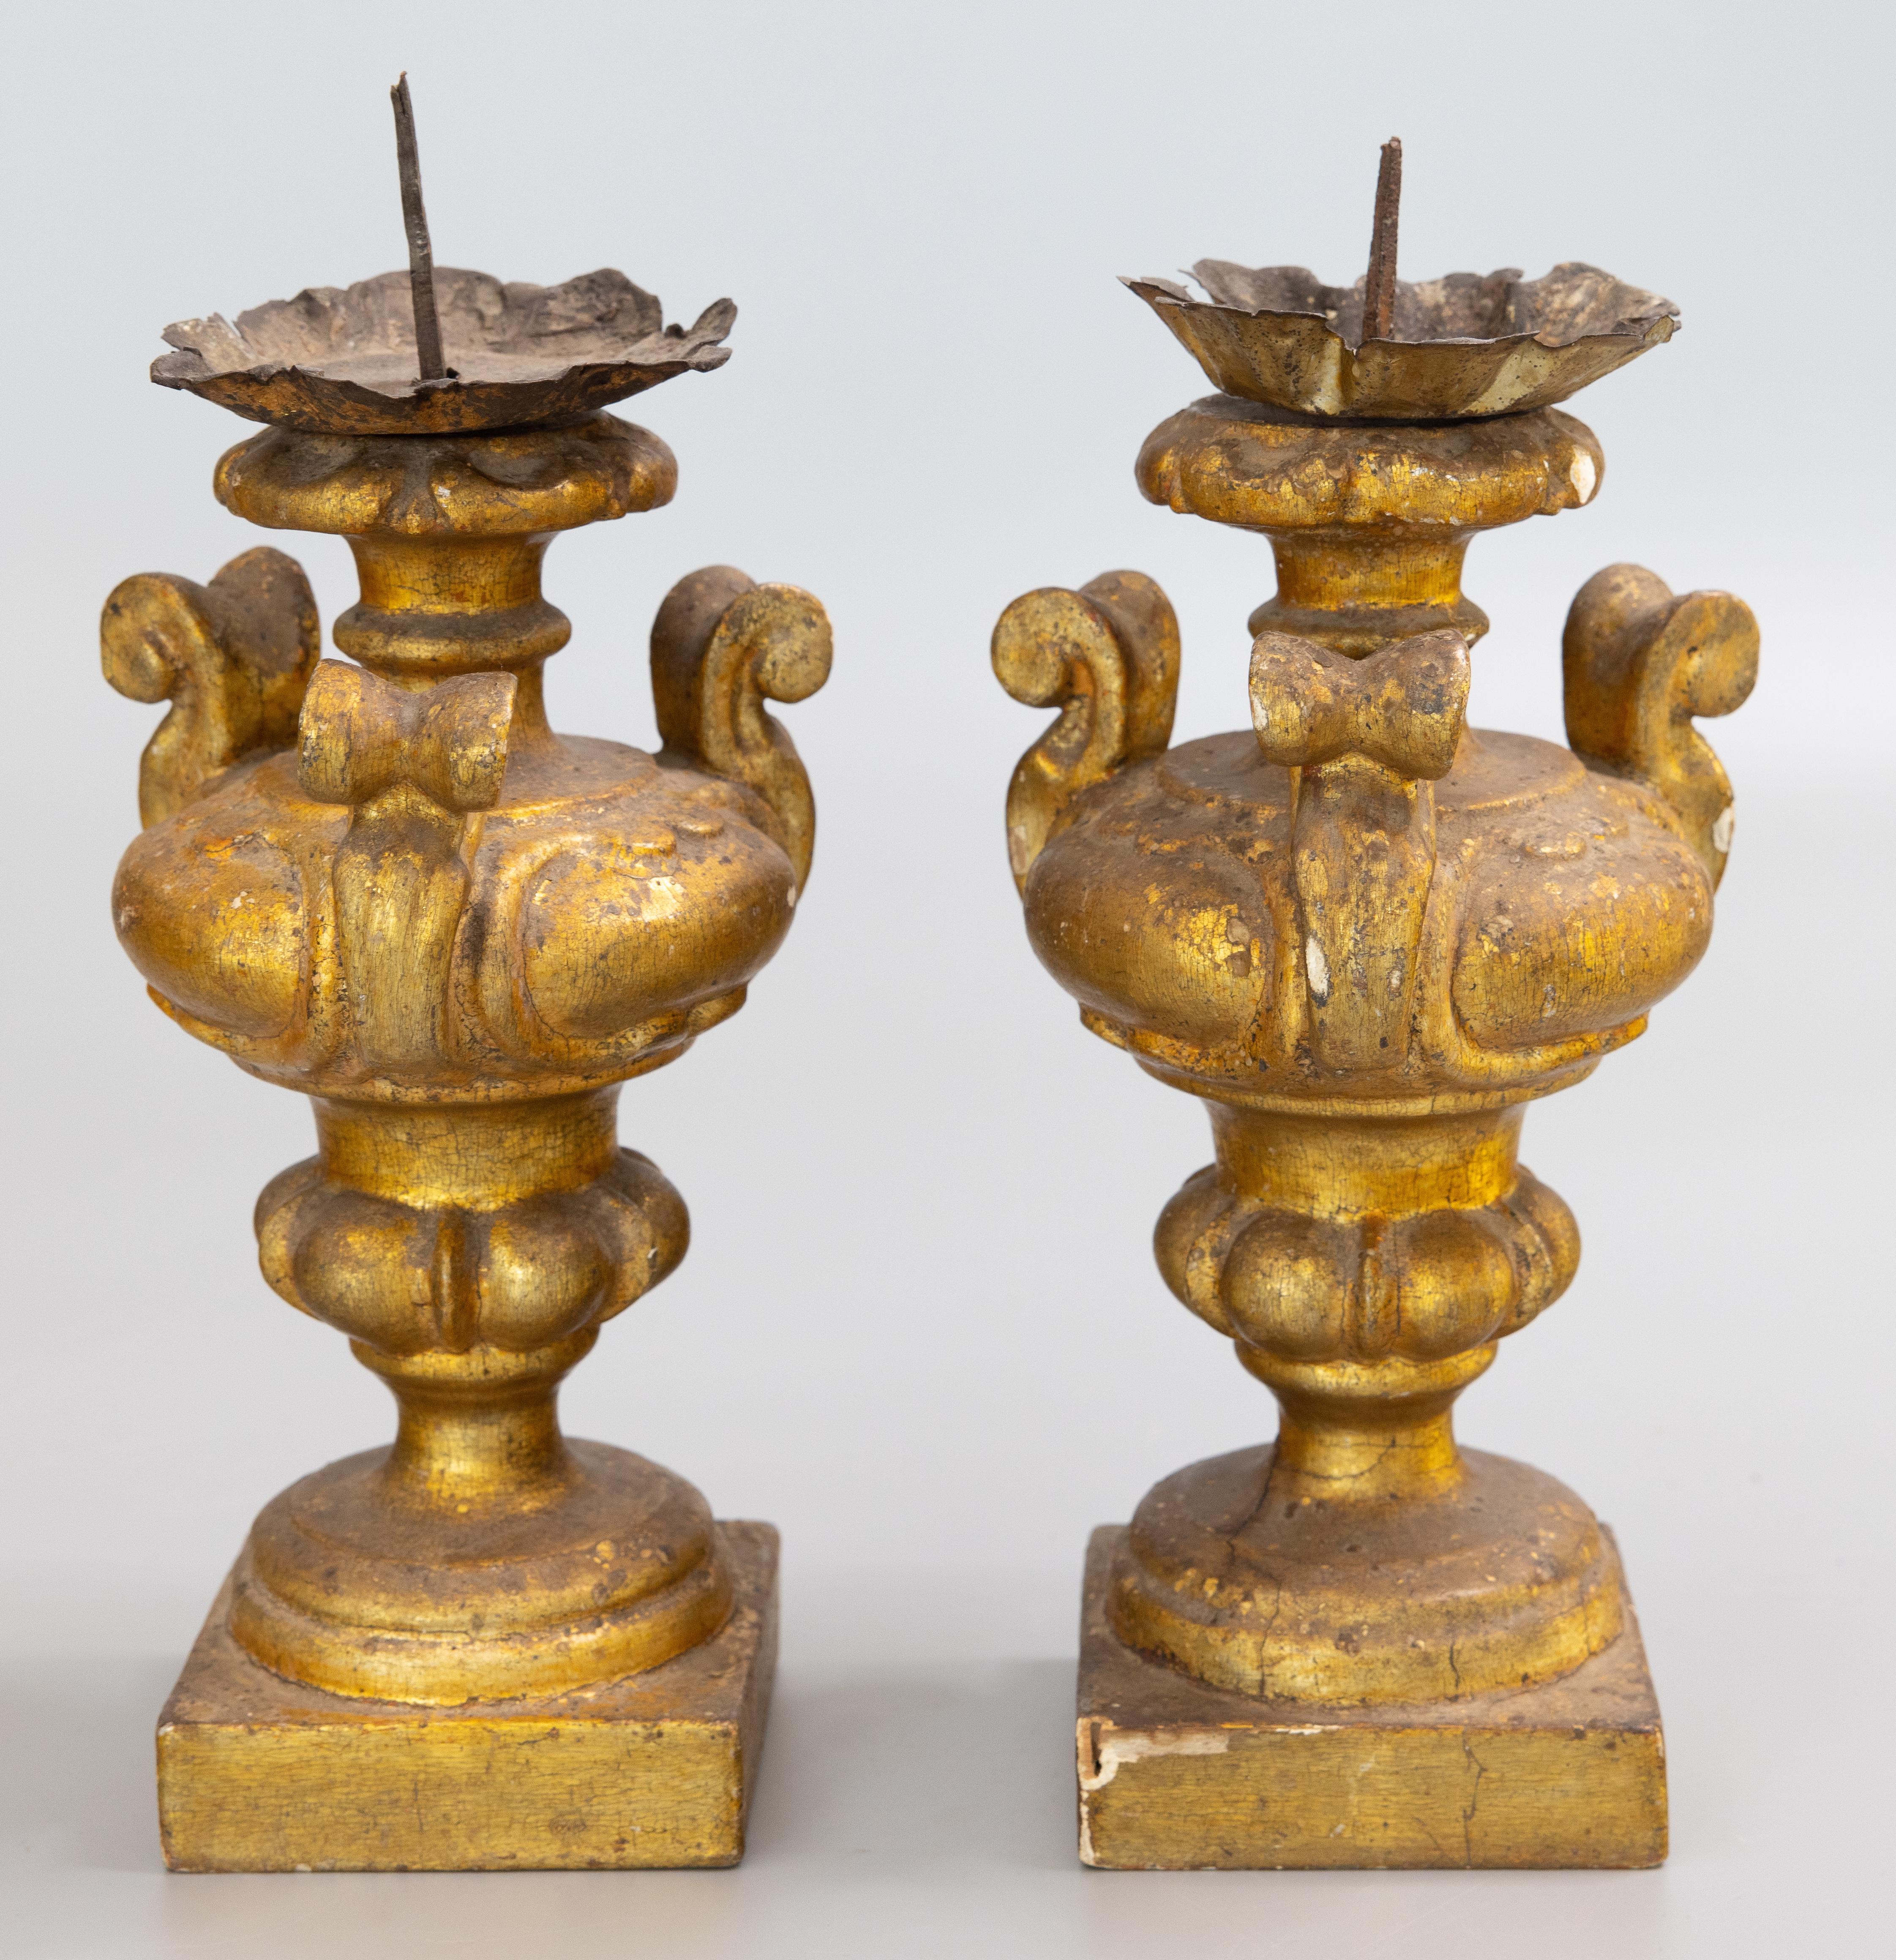 A stunning petite pair of 18th-Century Italian Neoclassical carved gilt wood gold leaf pricket candlesticks with metal bobeches. They measure 10